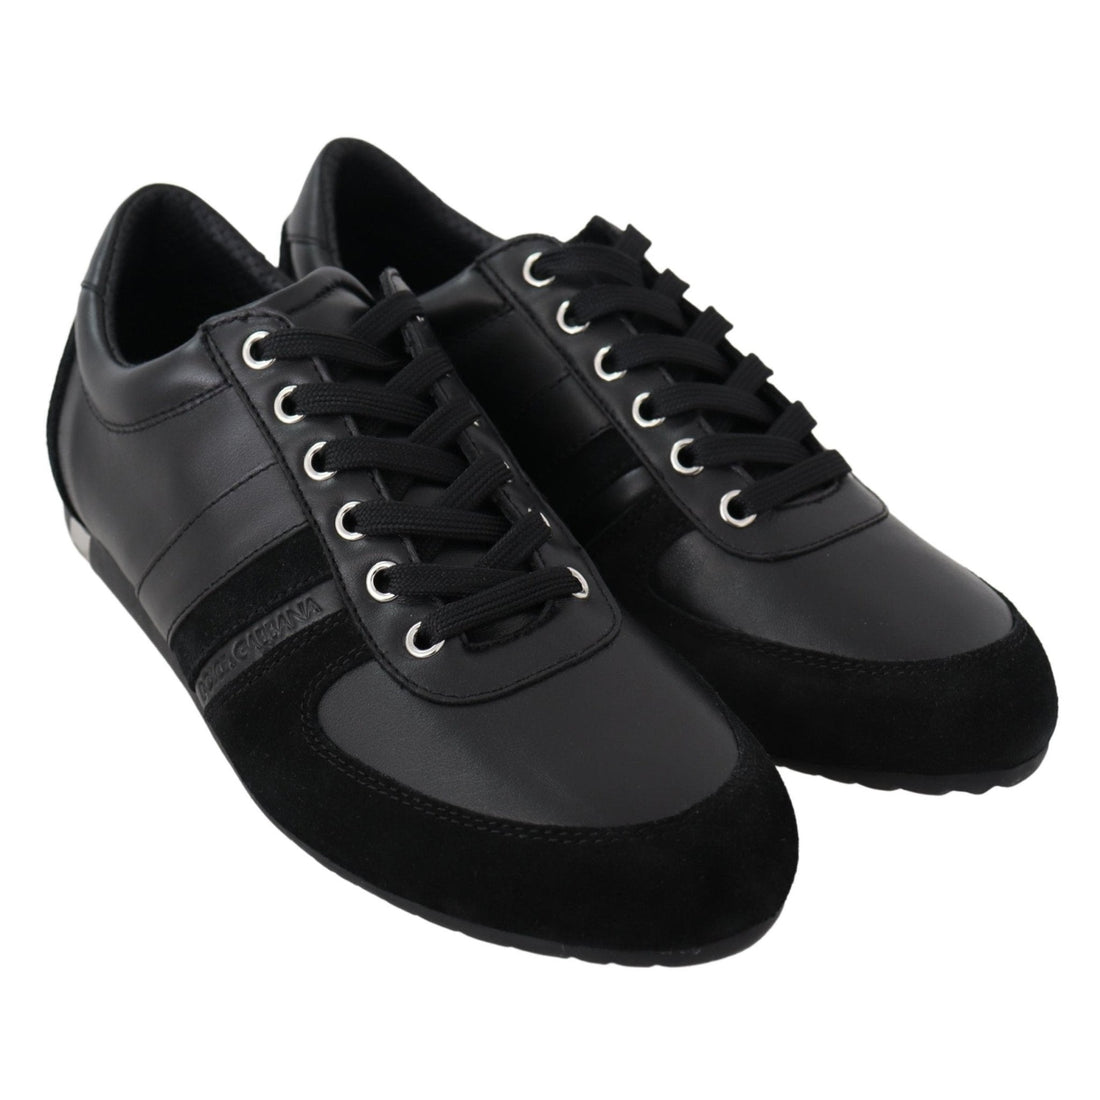 Dolce & Gabbana Black Logo Leather Casual Sneakers Shoes - Paris Deluxe